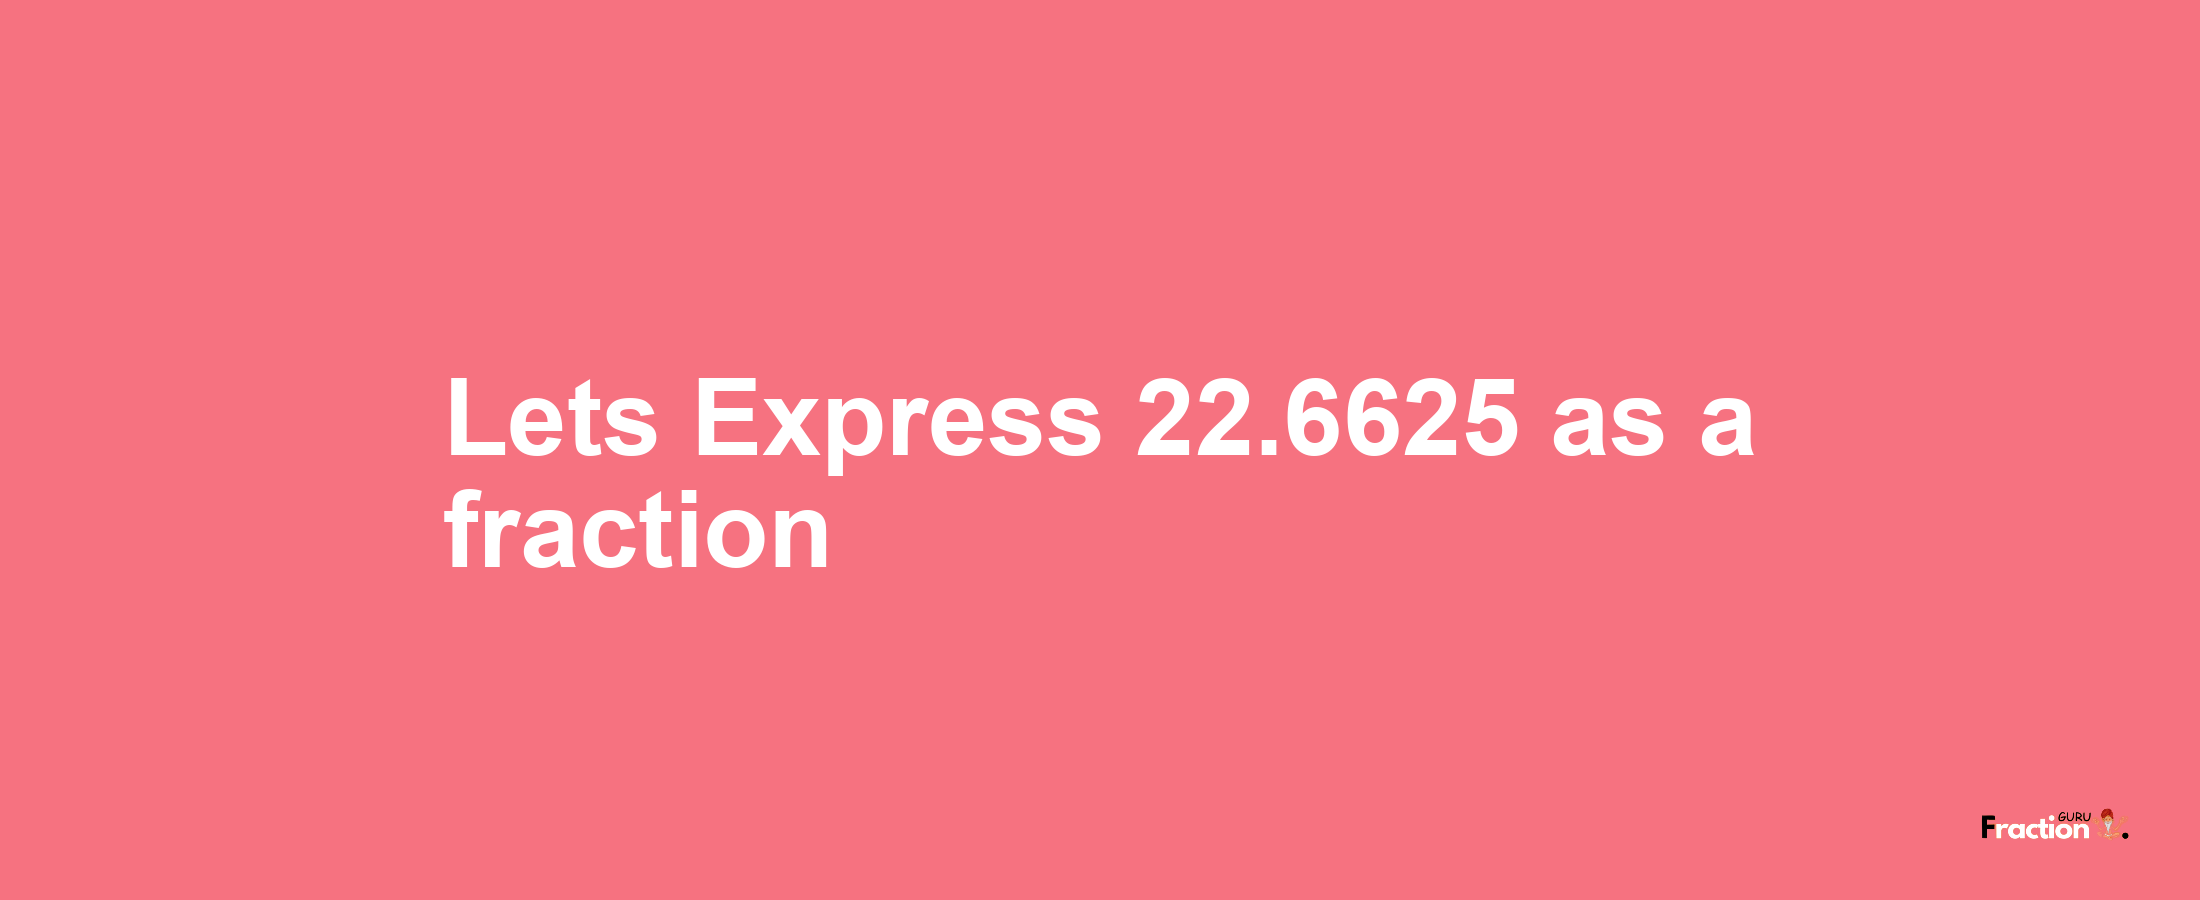 Lets Express 22.6625 as afraction